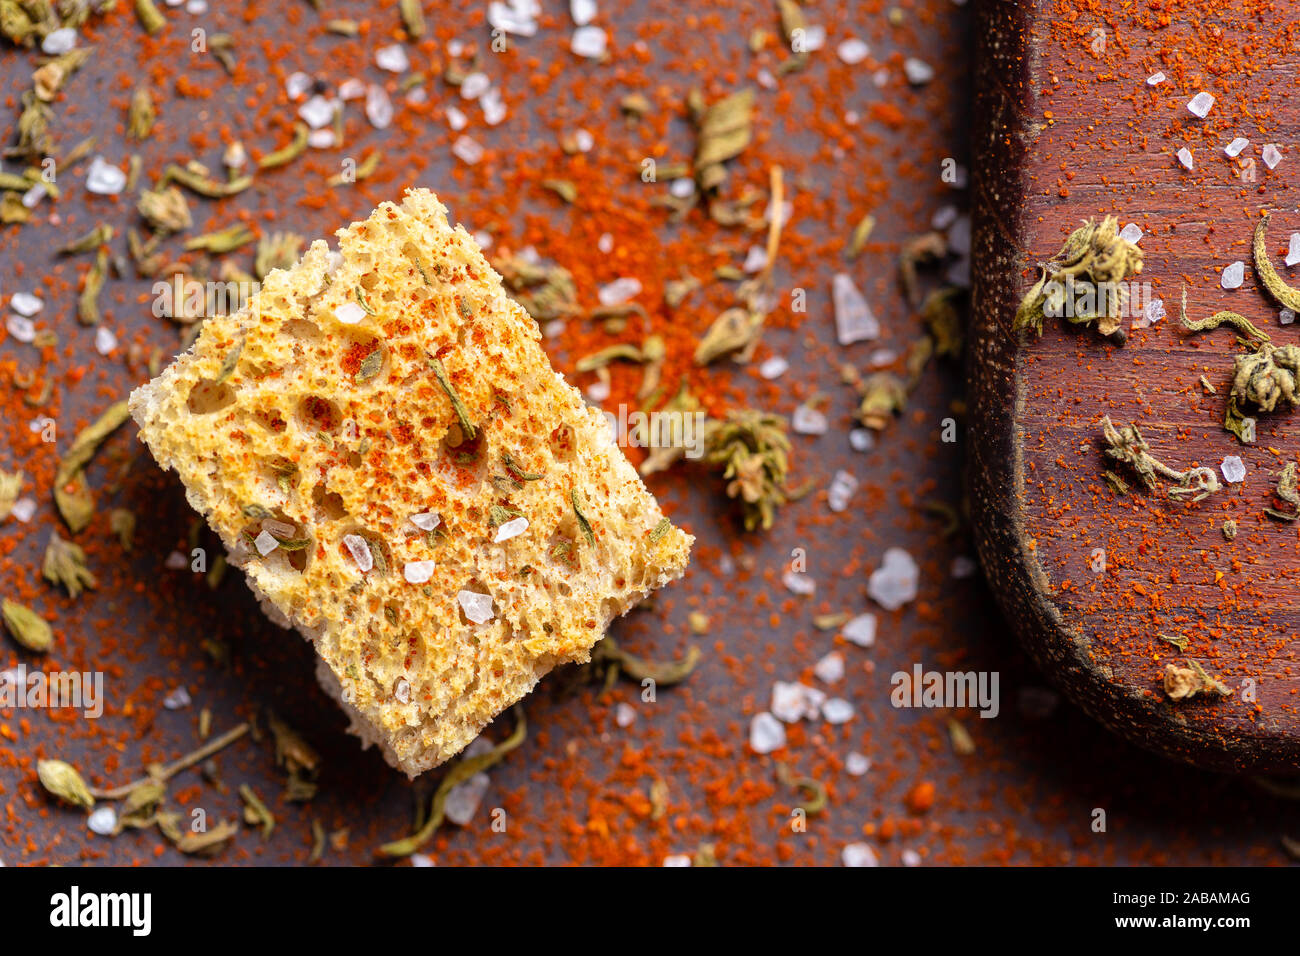 Top view of crouton with salt and spices over wood table Stock Photo